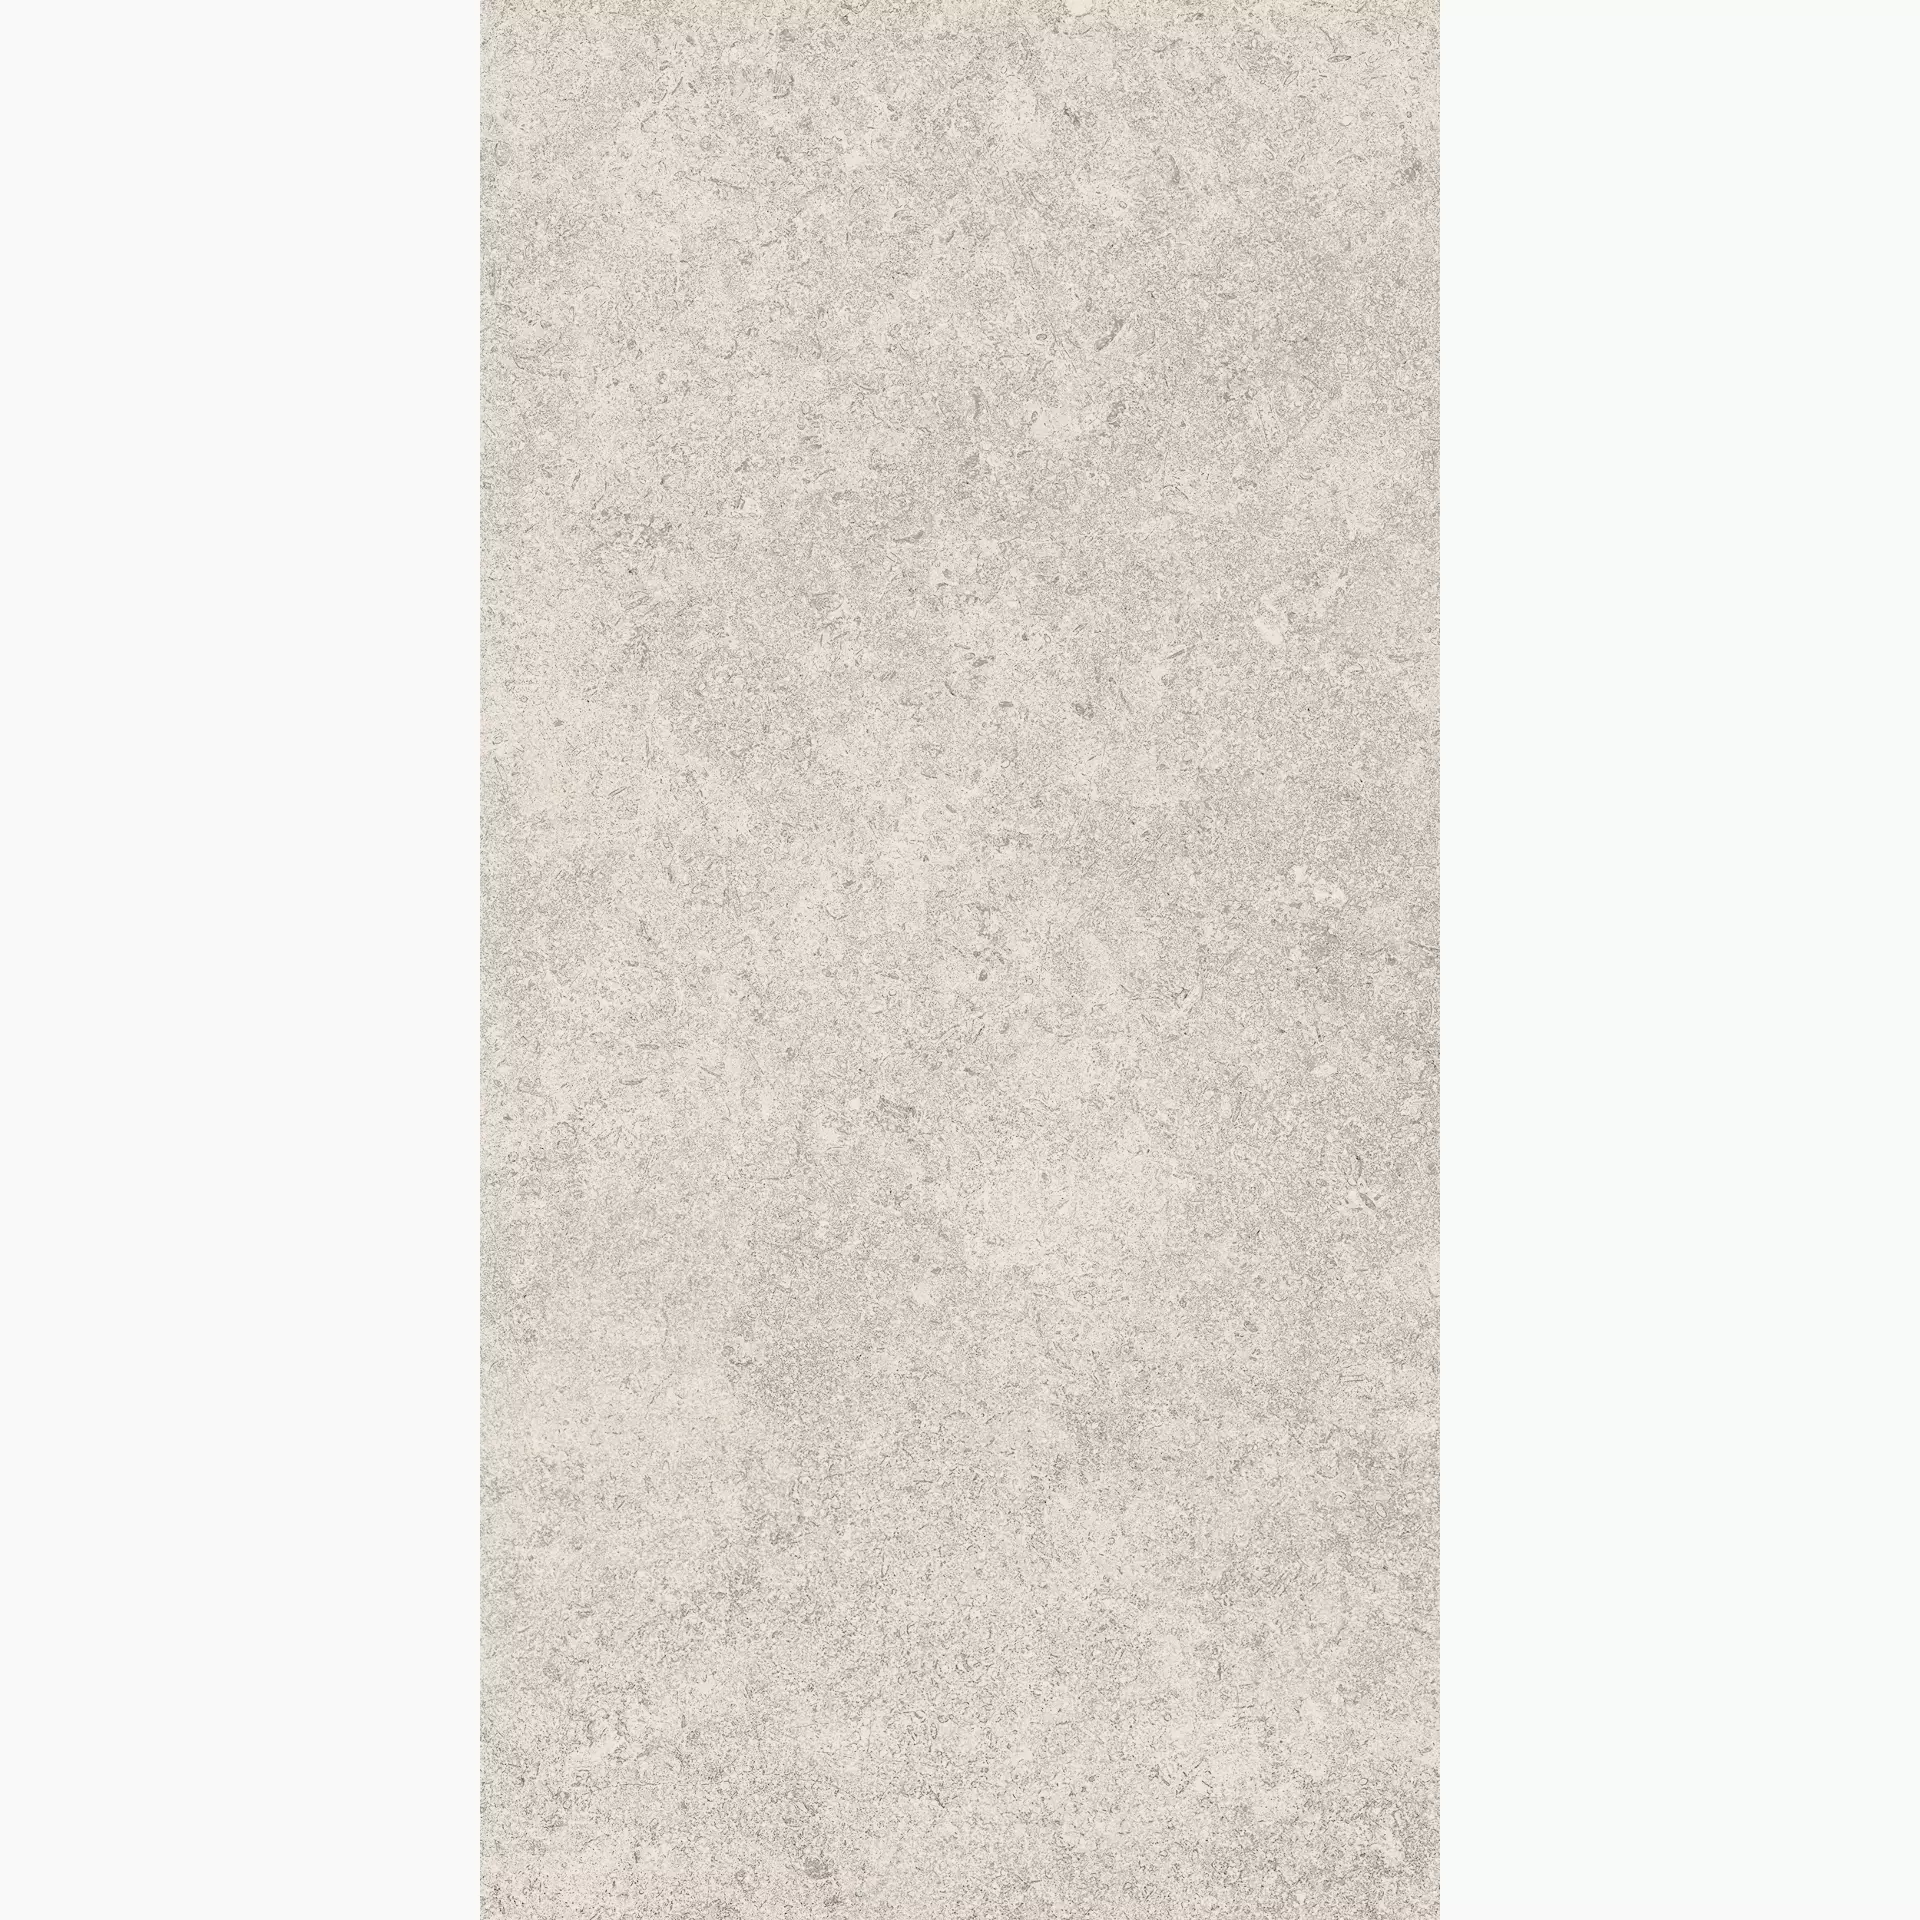 Cottodeste Pura Pearl Rolled Protect EG-PR25 30x60cm rectified 14mm